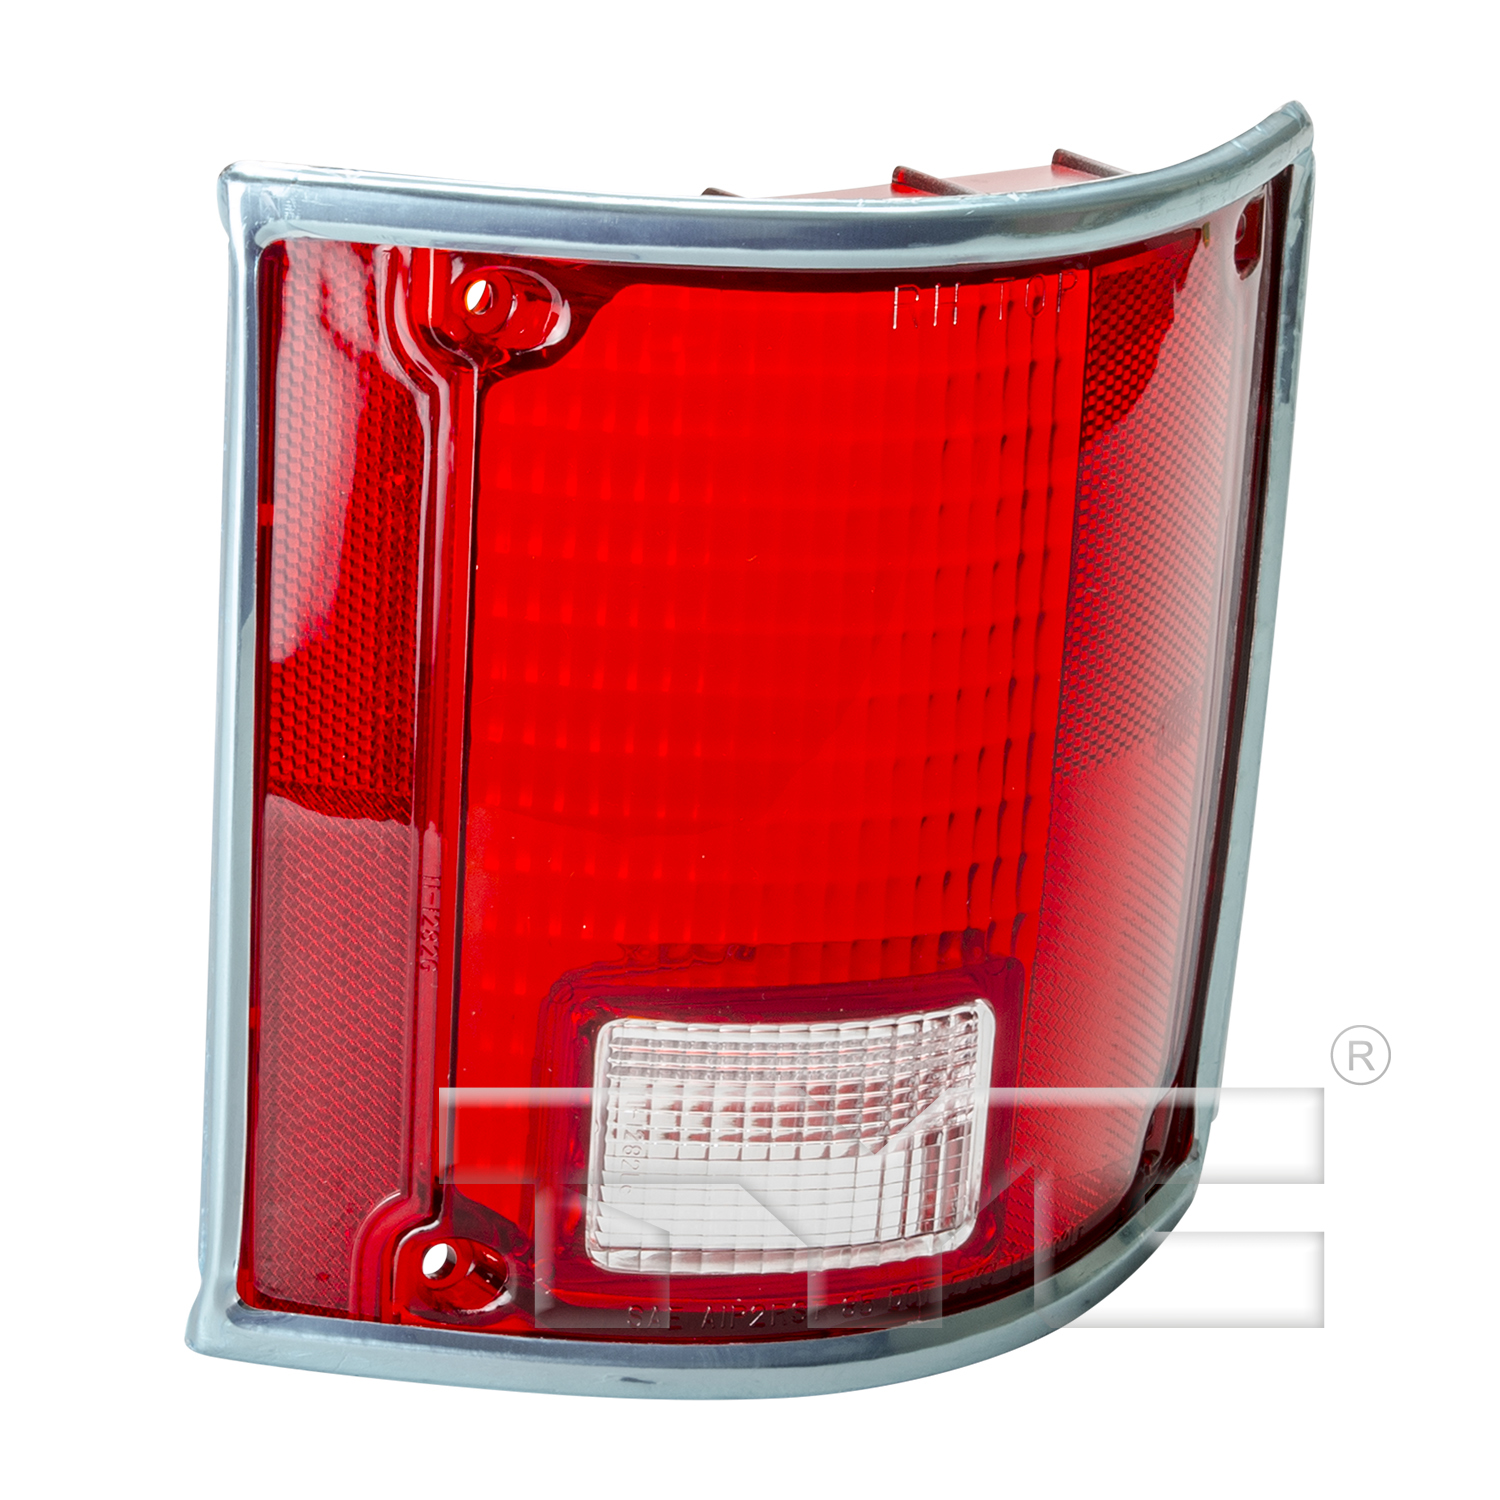 Aftermarket TAILLIGHTS for GMC - JIMMY, JIMMY,73-91,RT Taillamp lens